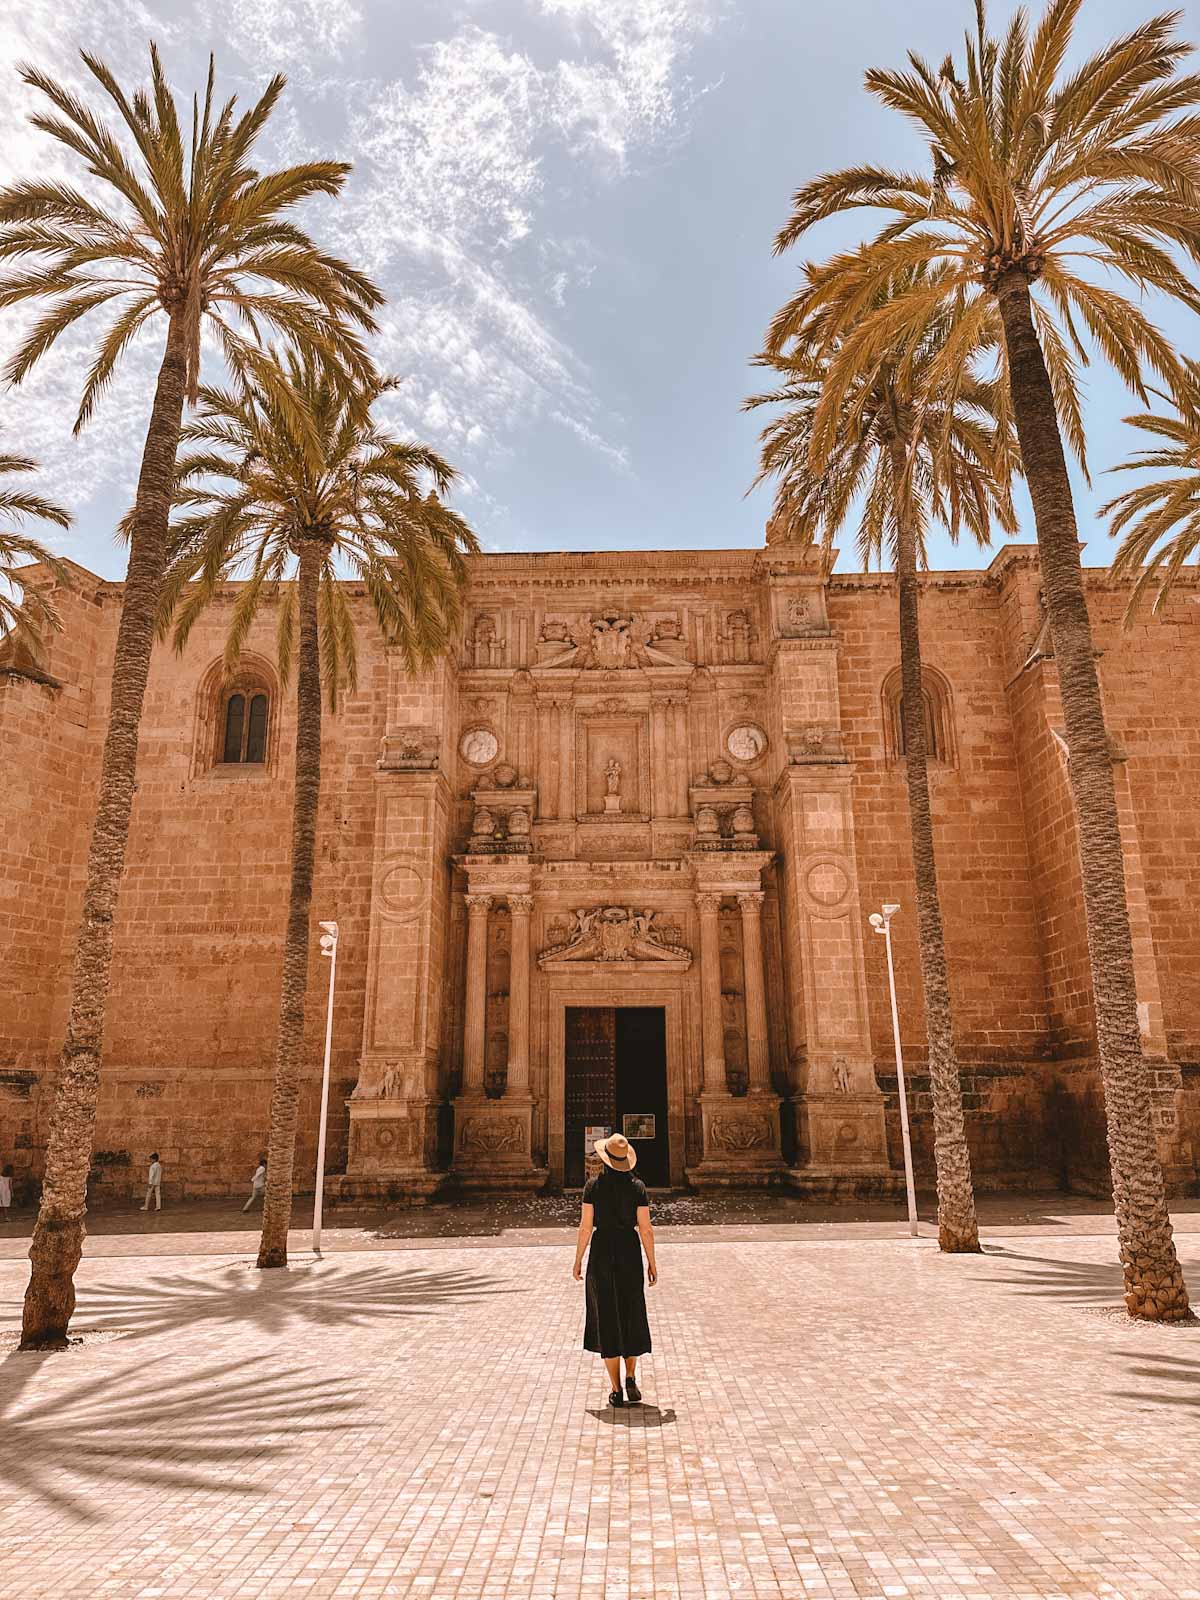 Best things to do and most beautiful Instagram photo spots in Almería, Spain